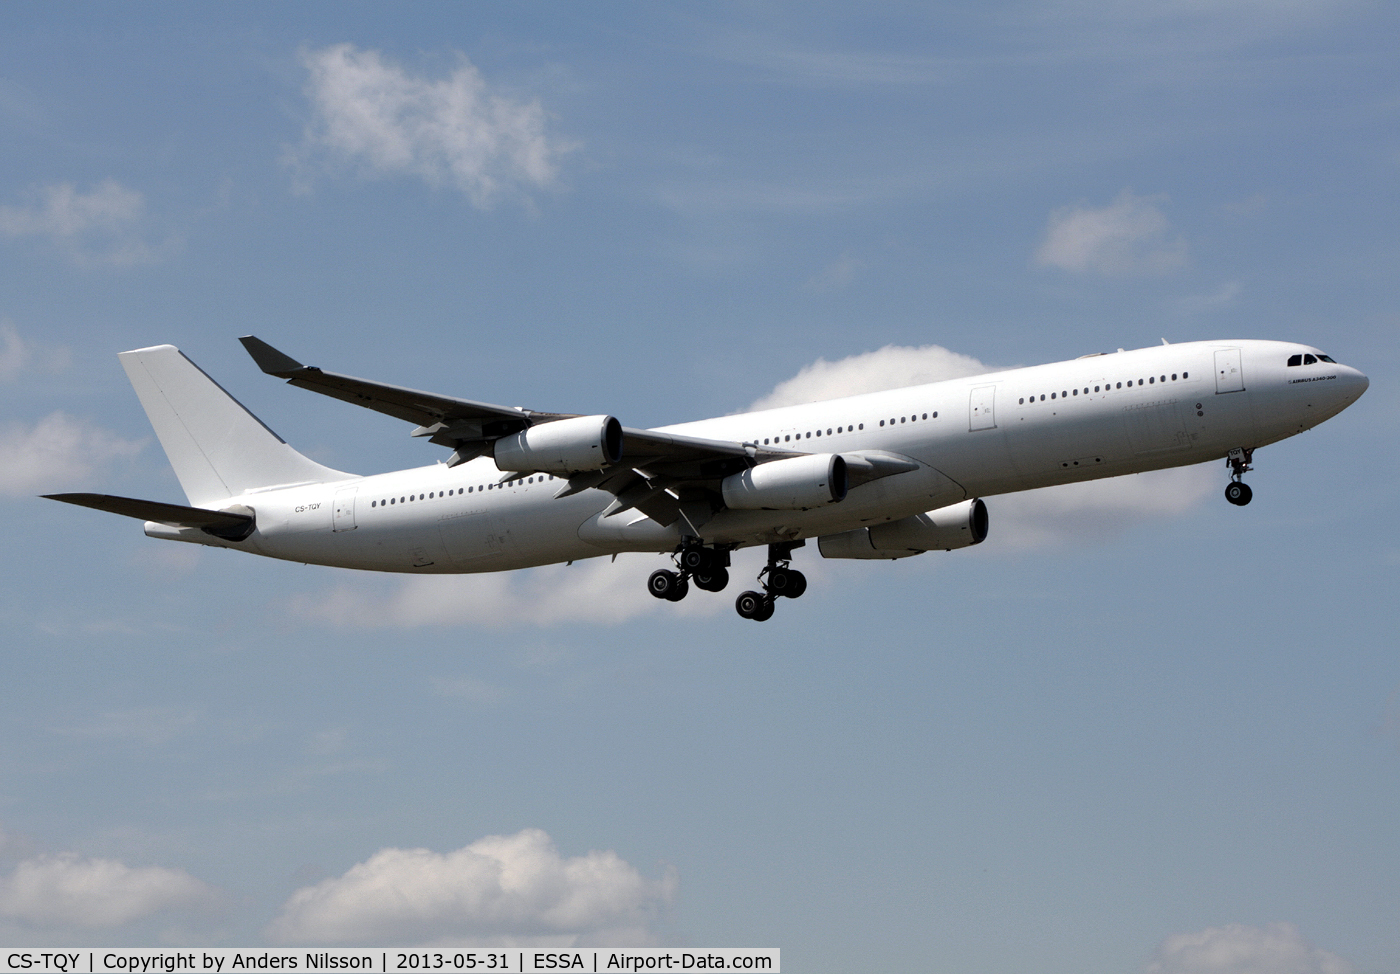 CS-TQY, 1997 Airbus A340-313X C/N 190, On final approach for 01R.